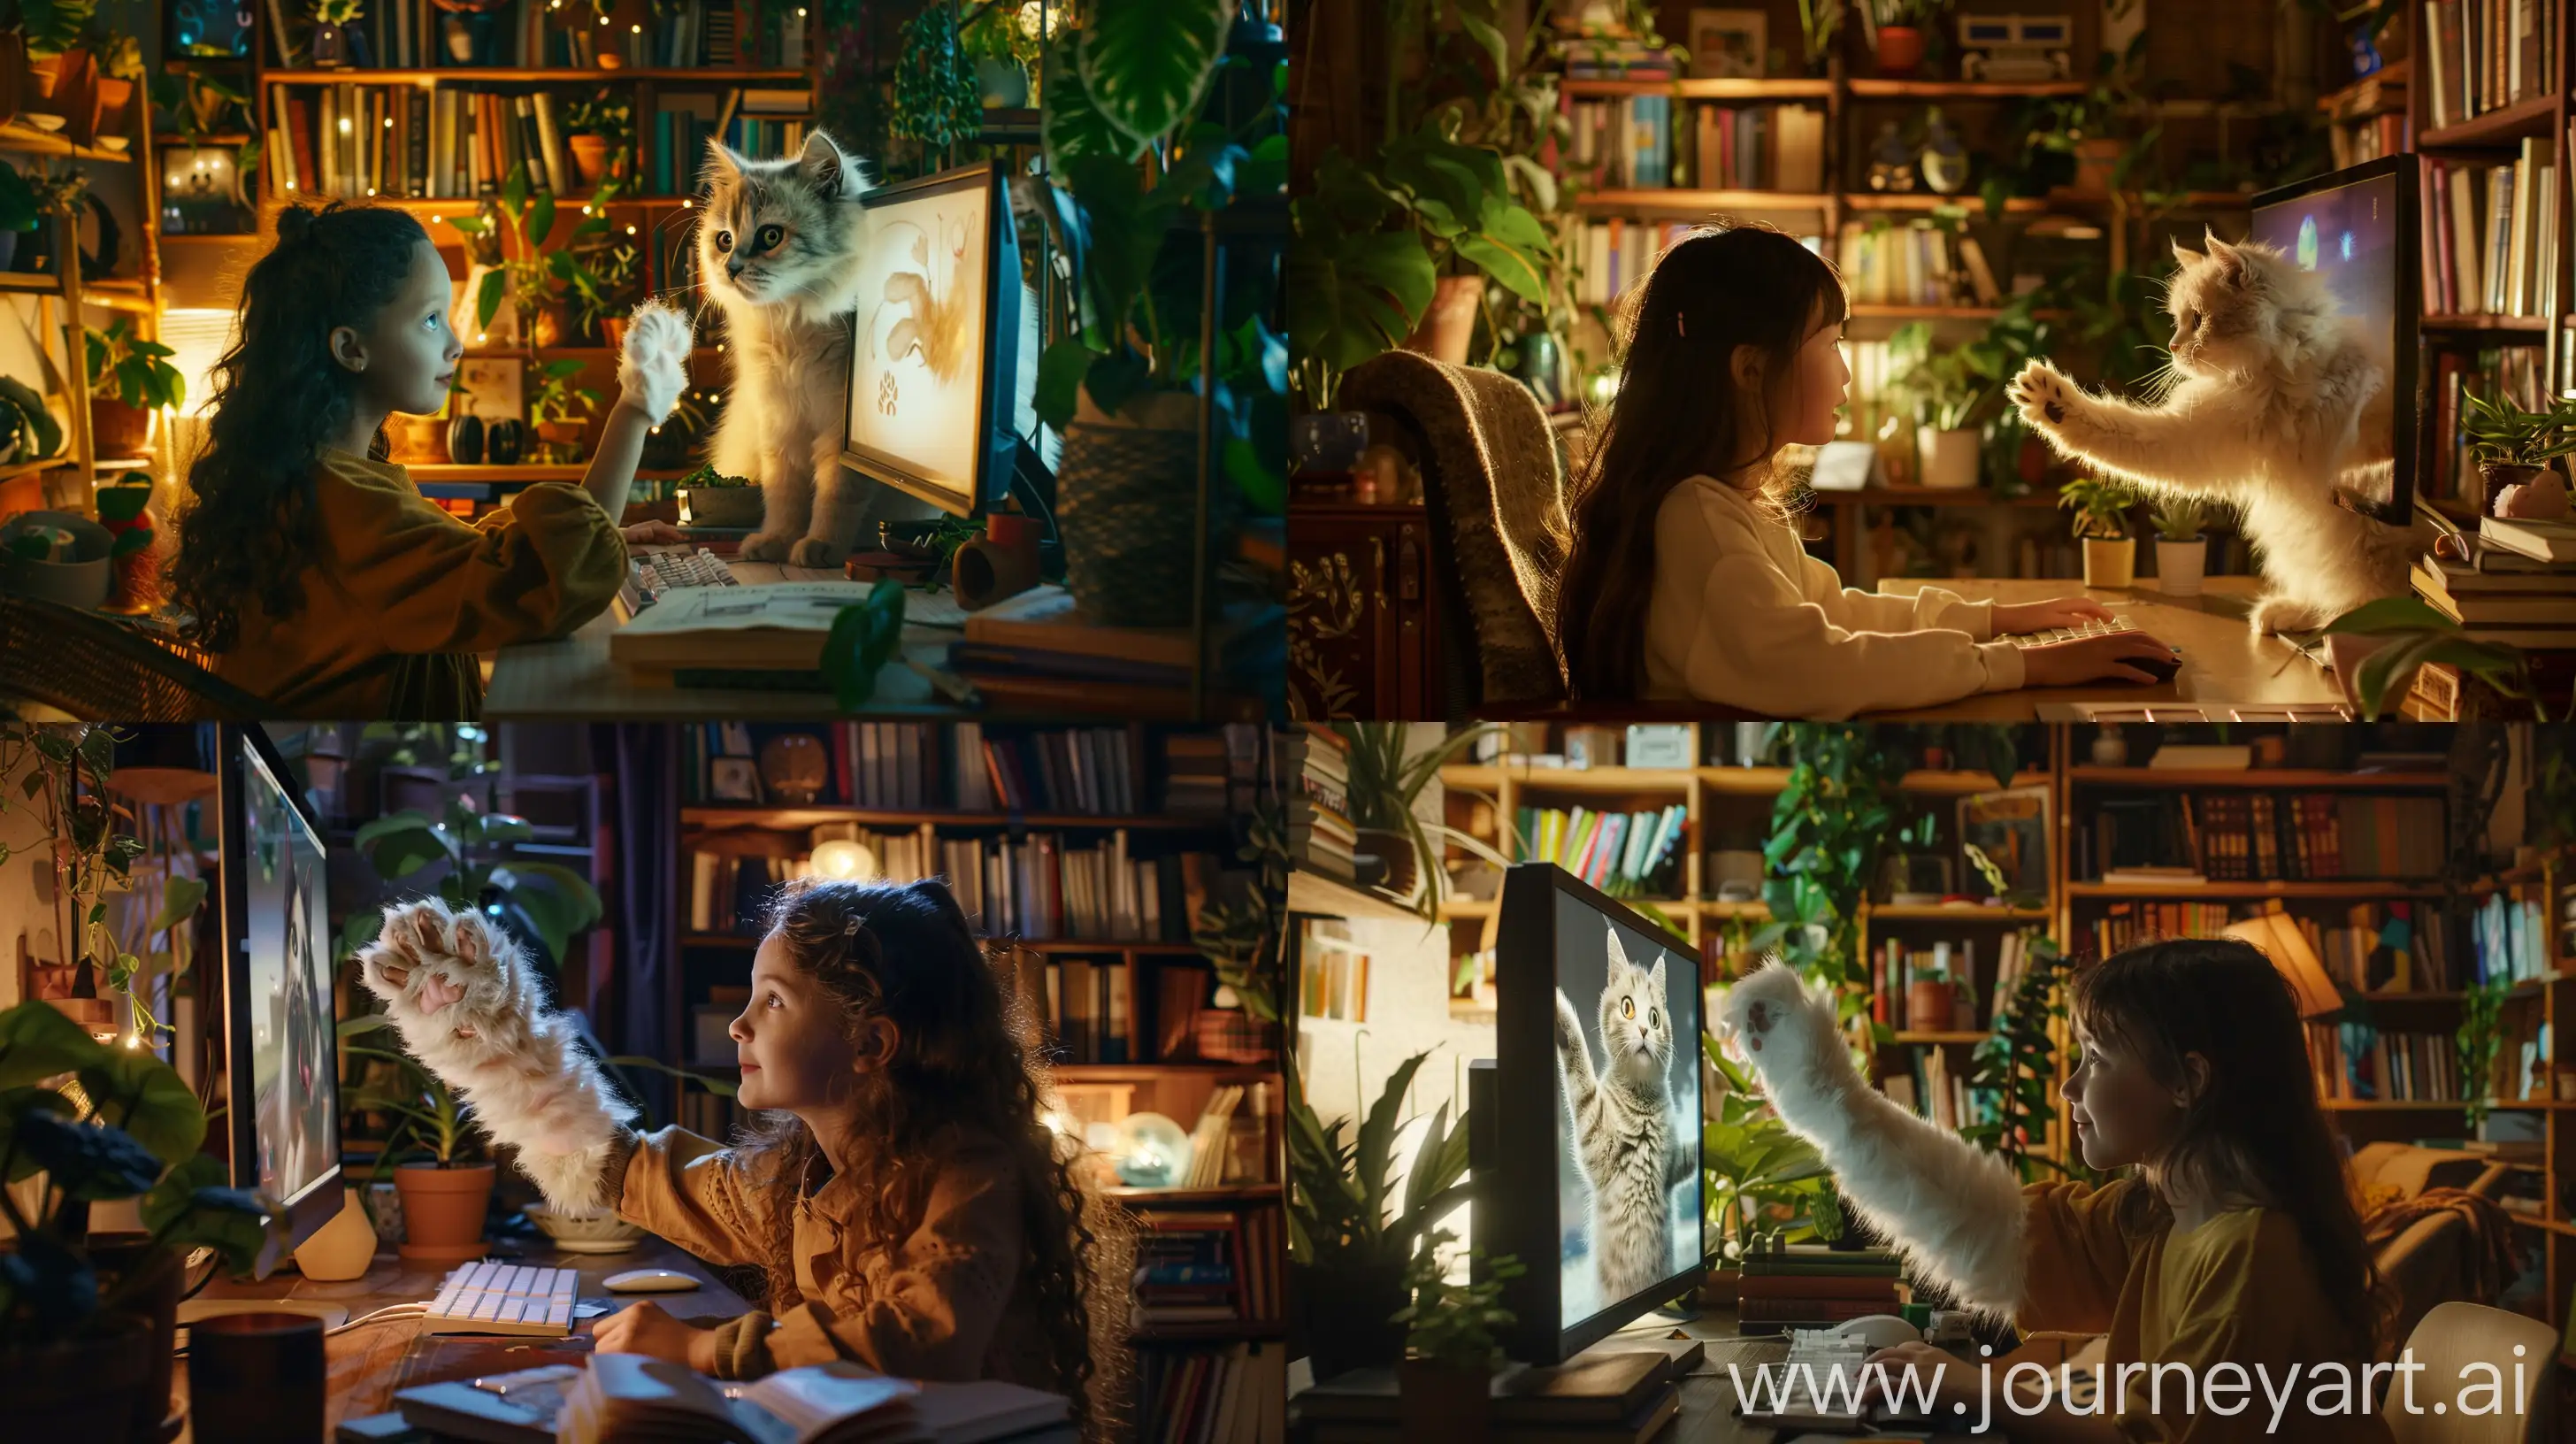 /imagine prompt: A young girl sits in front of her computer in a cozy, dimly lit room filled with books and plants. She is focused on the screen, which illuminates her face with a soft glow. Suddenly, an animated, fluffy cat on the screen becomes lifelike and extends its paw out of the digital frame, waving at her with a friendly gesture, inviting her into an enchanting digital world. The scene captures her surprised and delighted reaction, as the boundary between the real and virtual world blurs --ar 16:9 --style raw --v 6.0